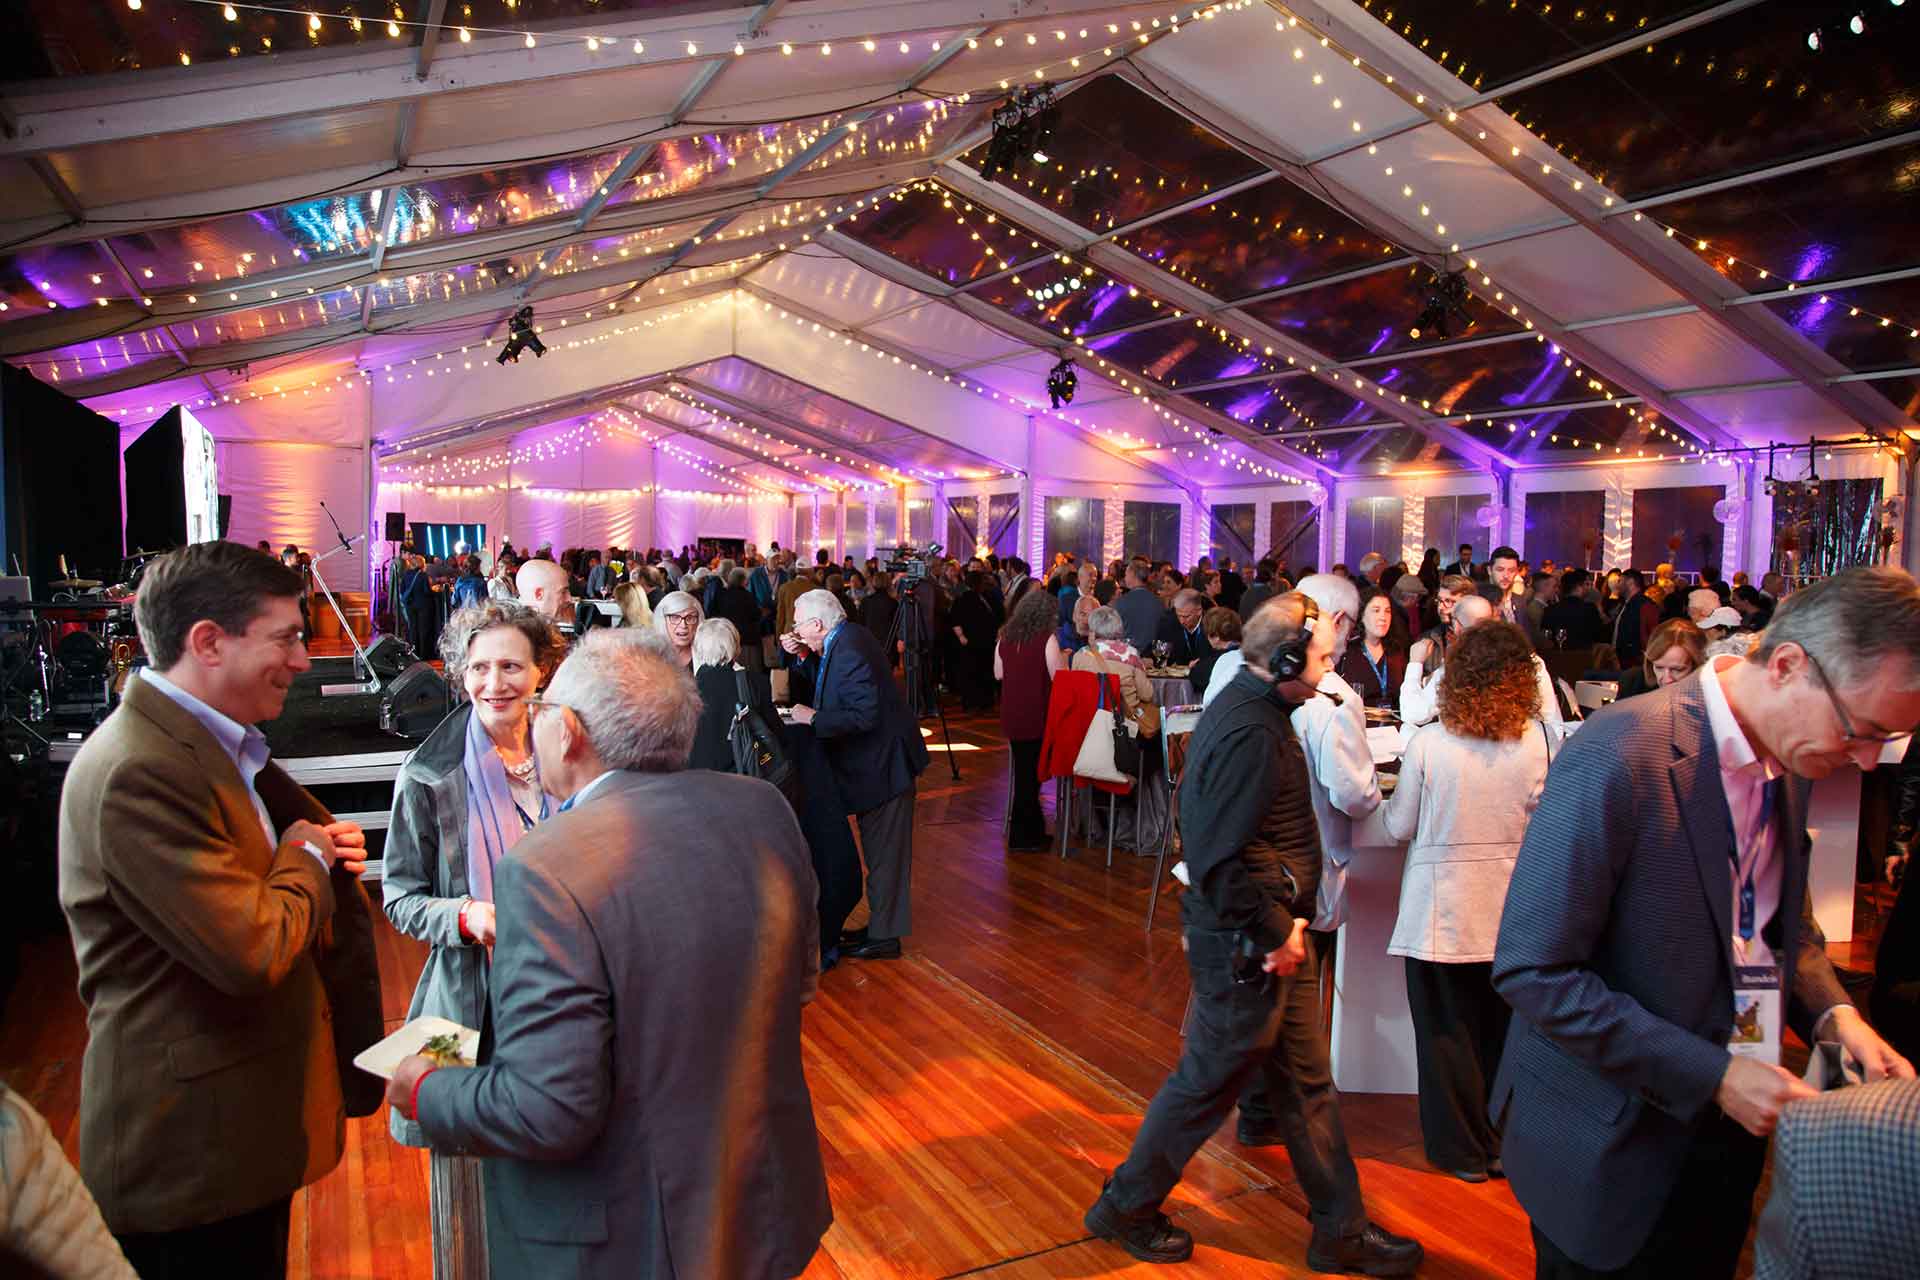 Inside the gala tent